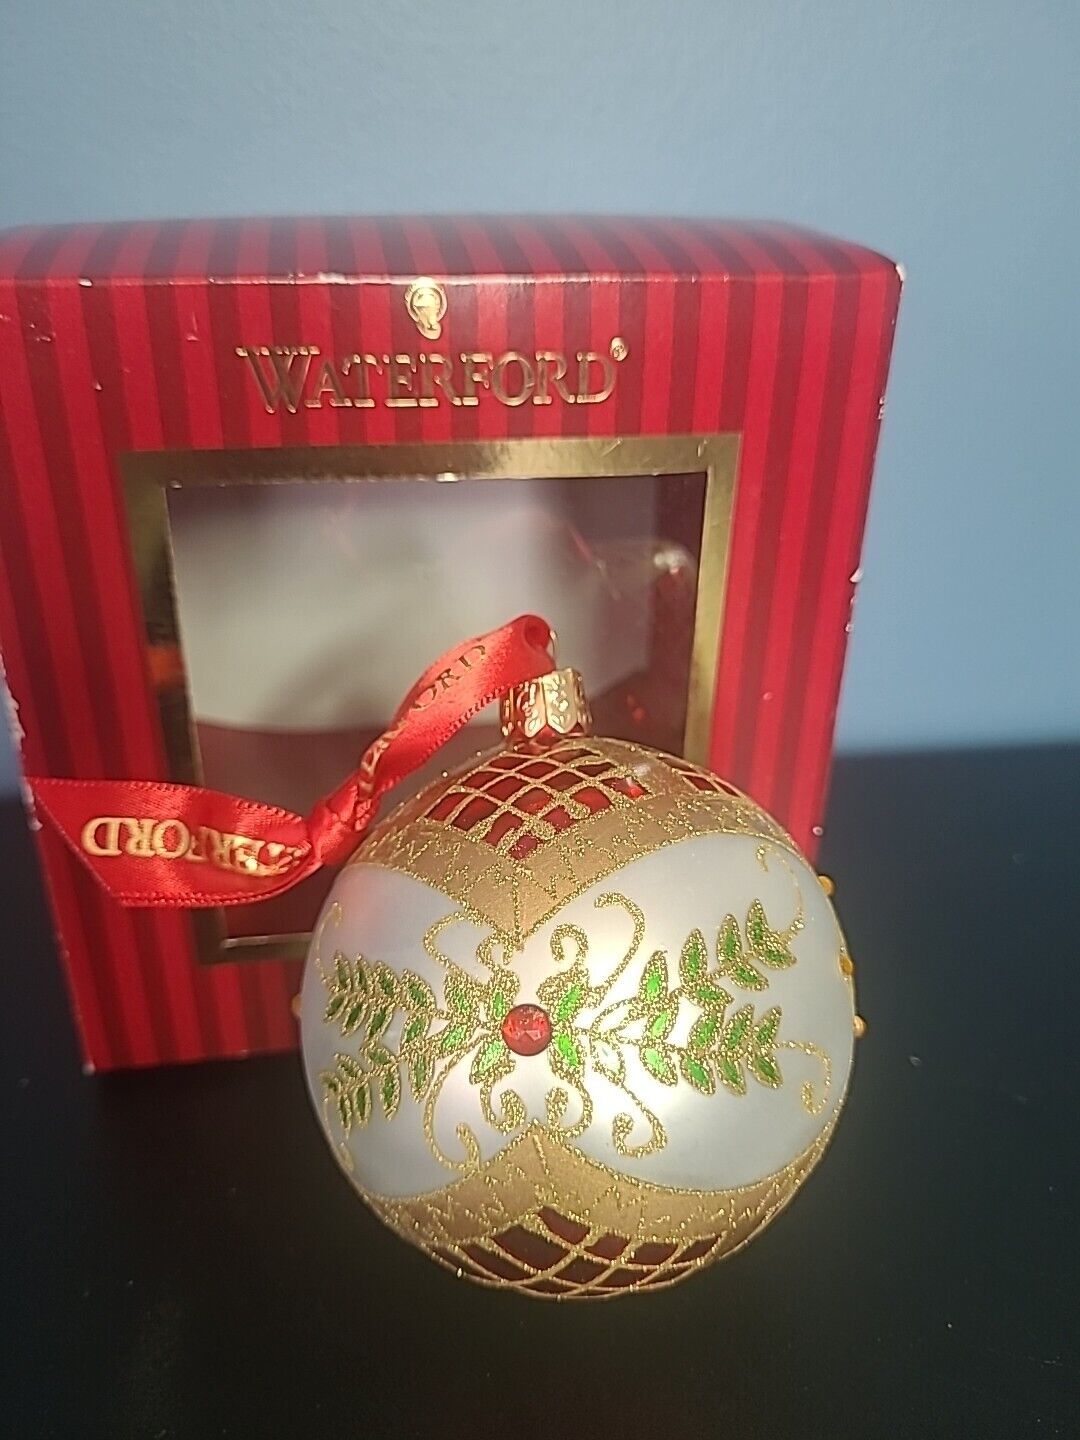 WATERFORD HOLIDAY HEIRLOOMS Antique Elegance BALL ORNAMENT Original Box Ribbon